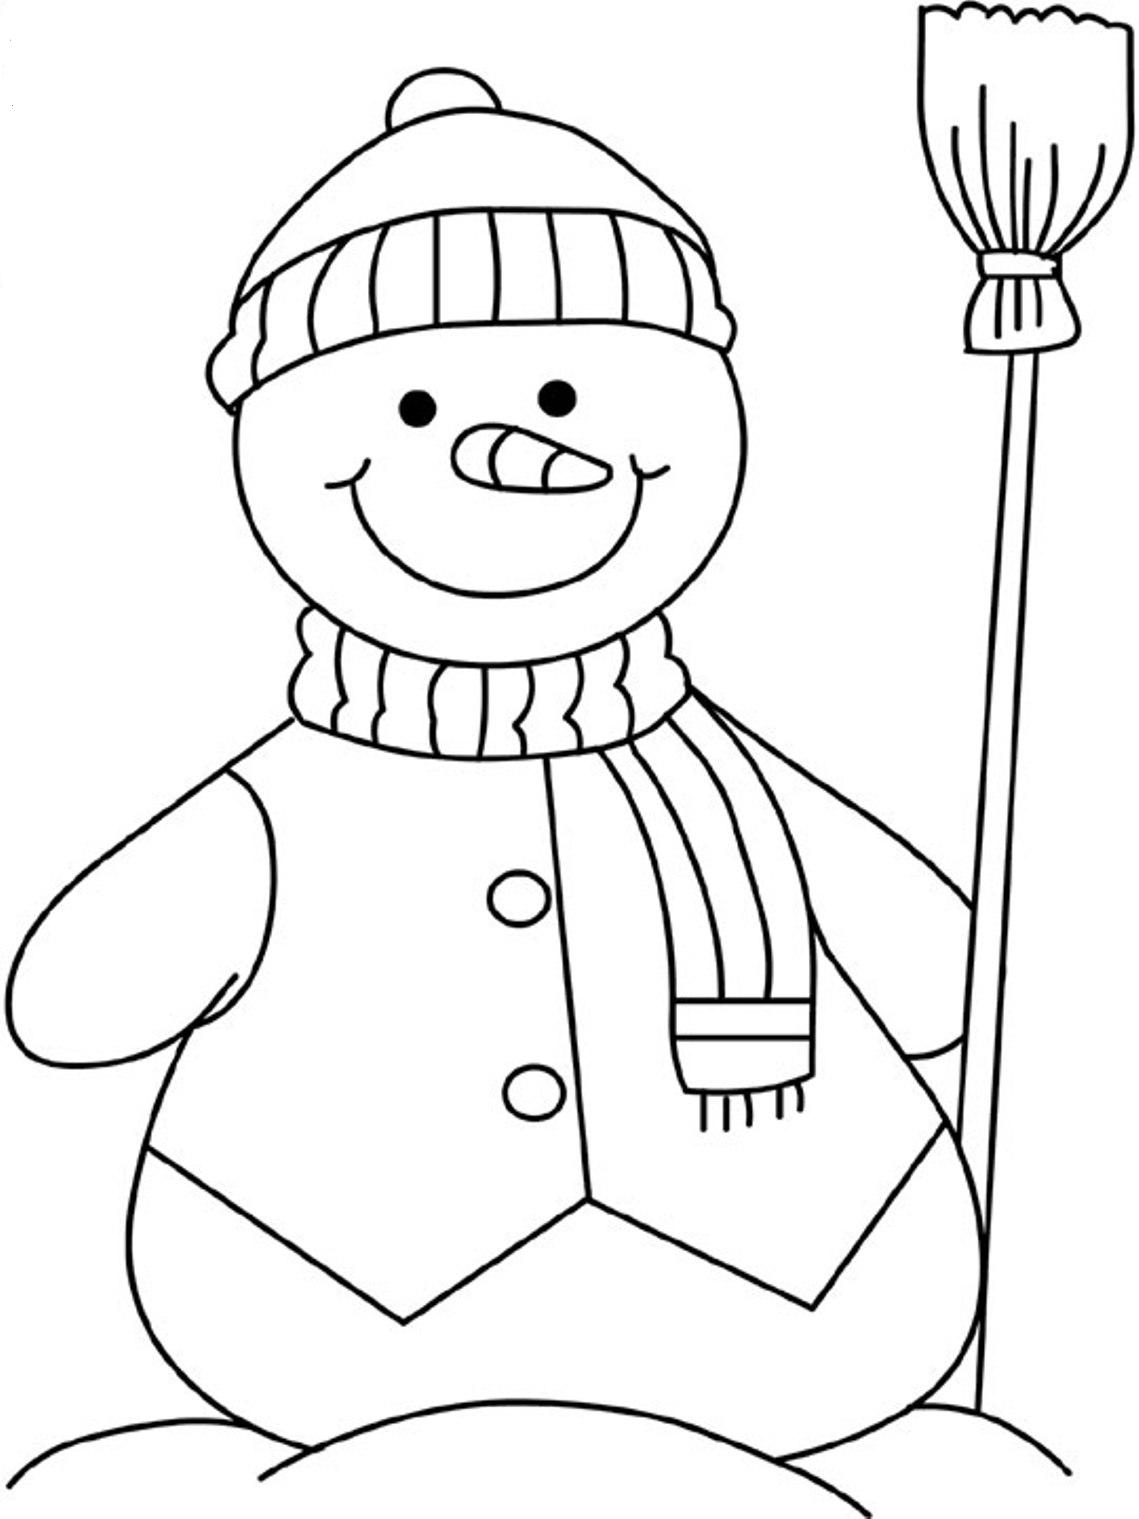 Winter S Snowman Free42fb Coloring Page